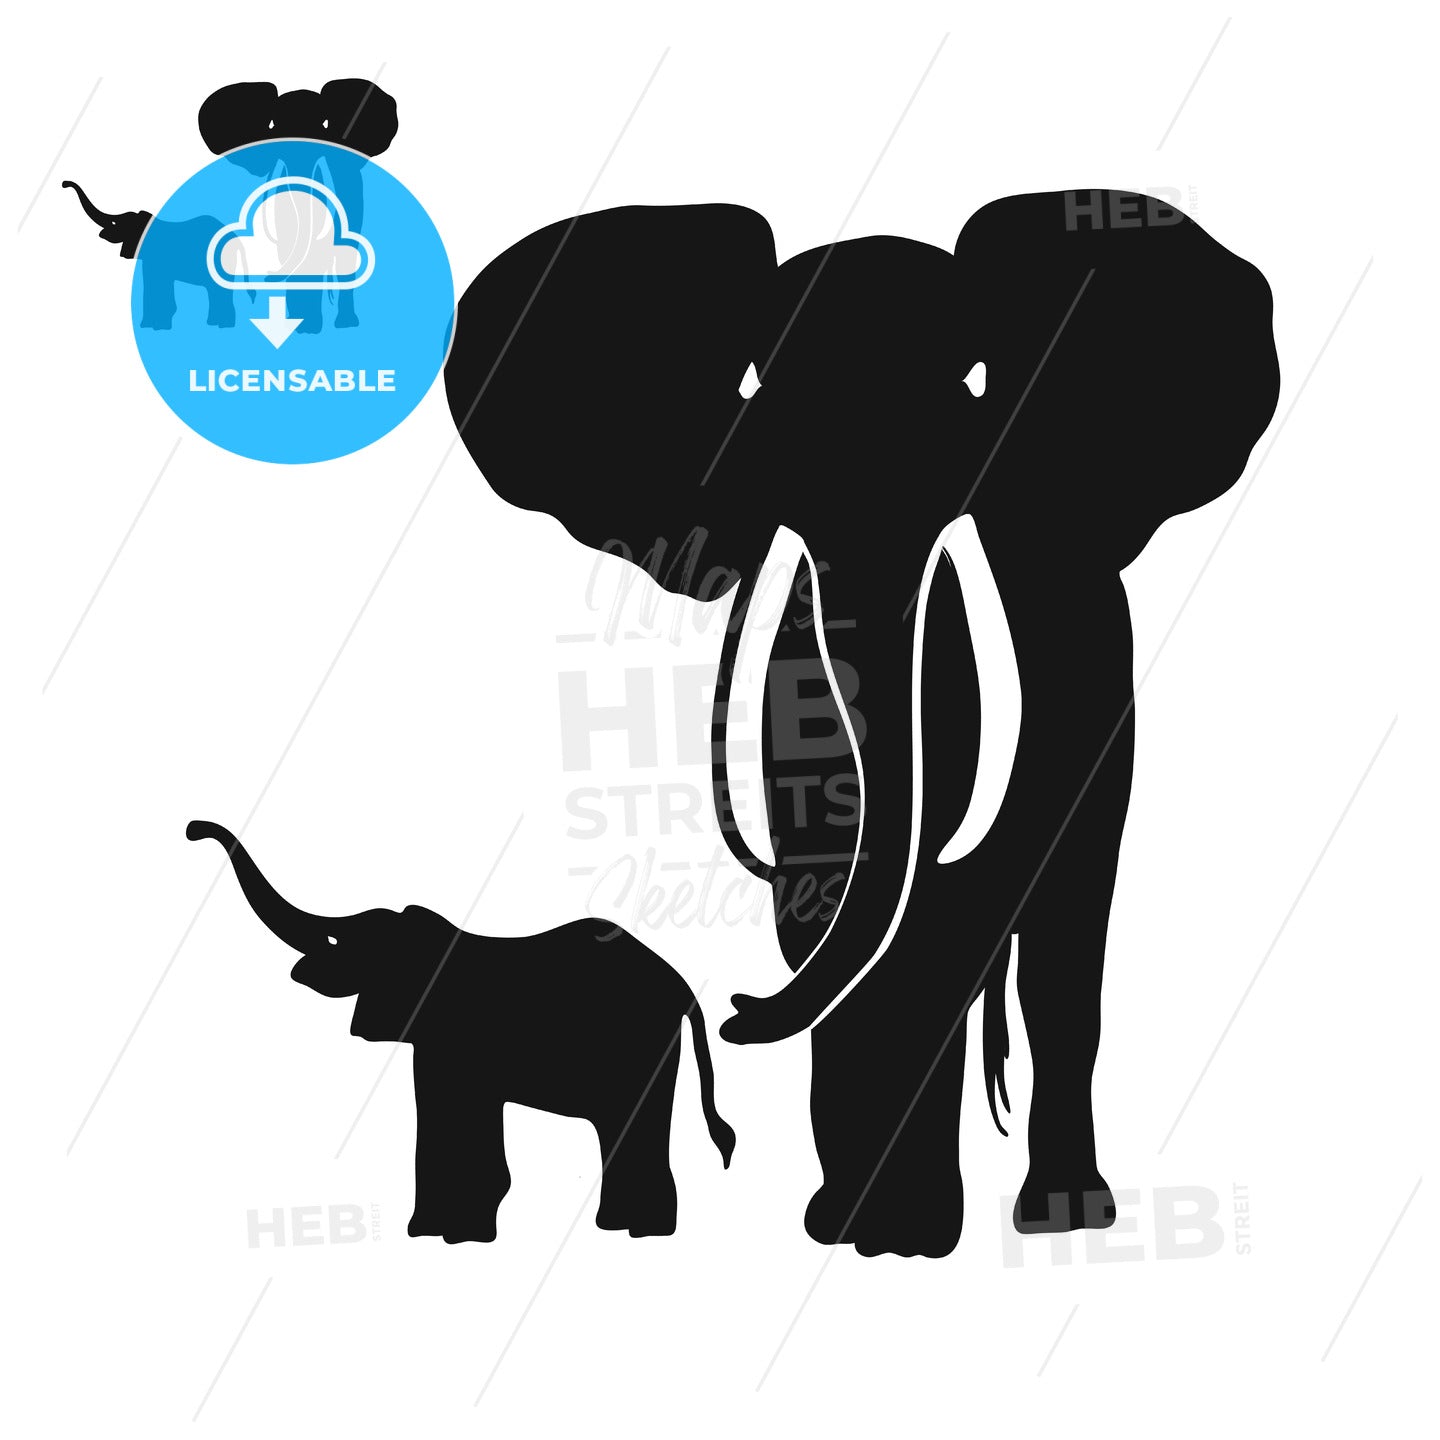 Two Elephants Silhouettes – instant download